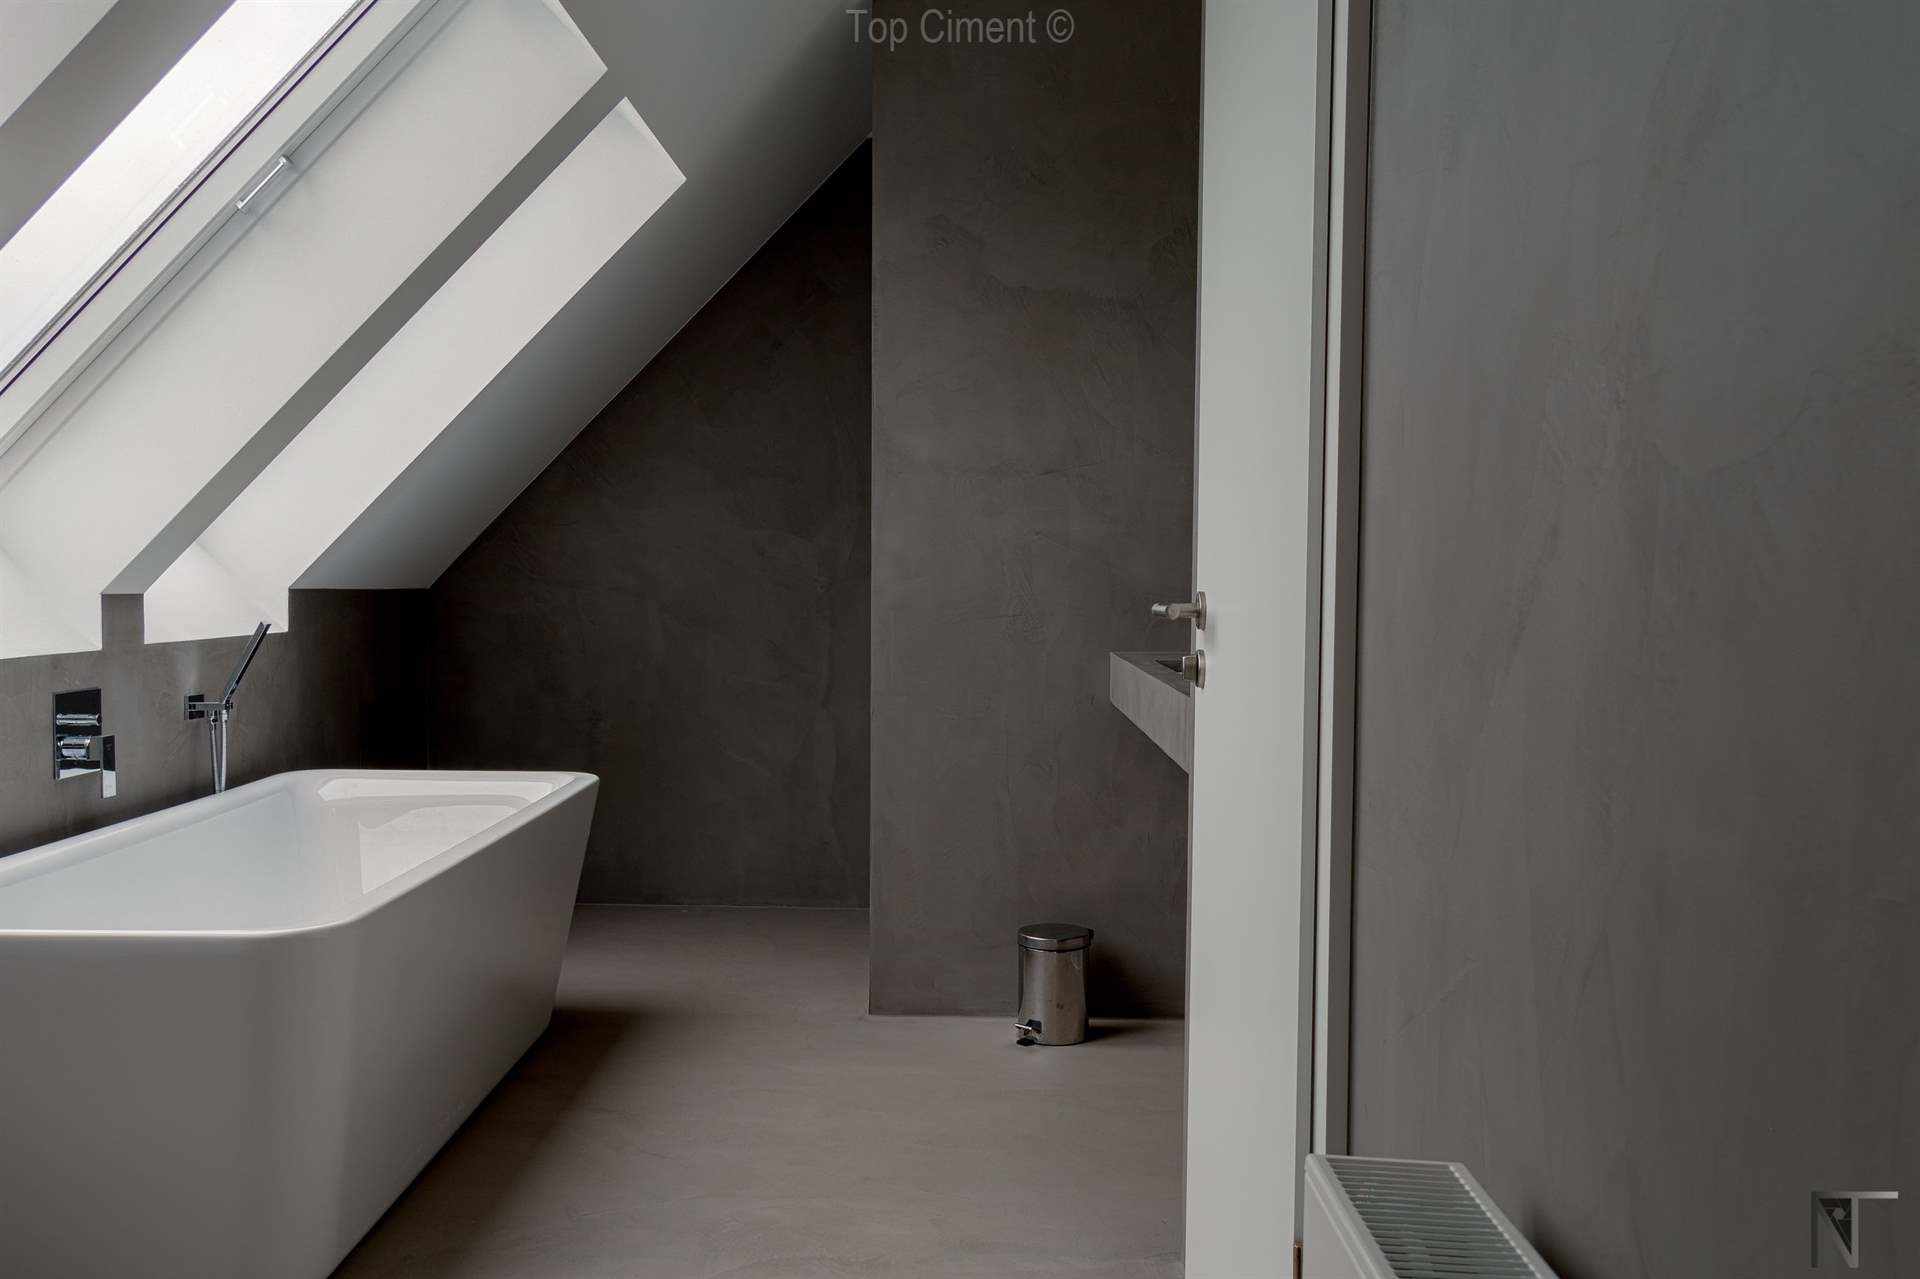 Tiled bathroom renovated with Microfino Topciment microcement